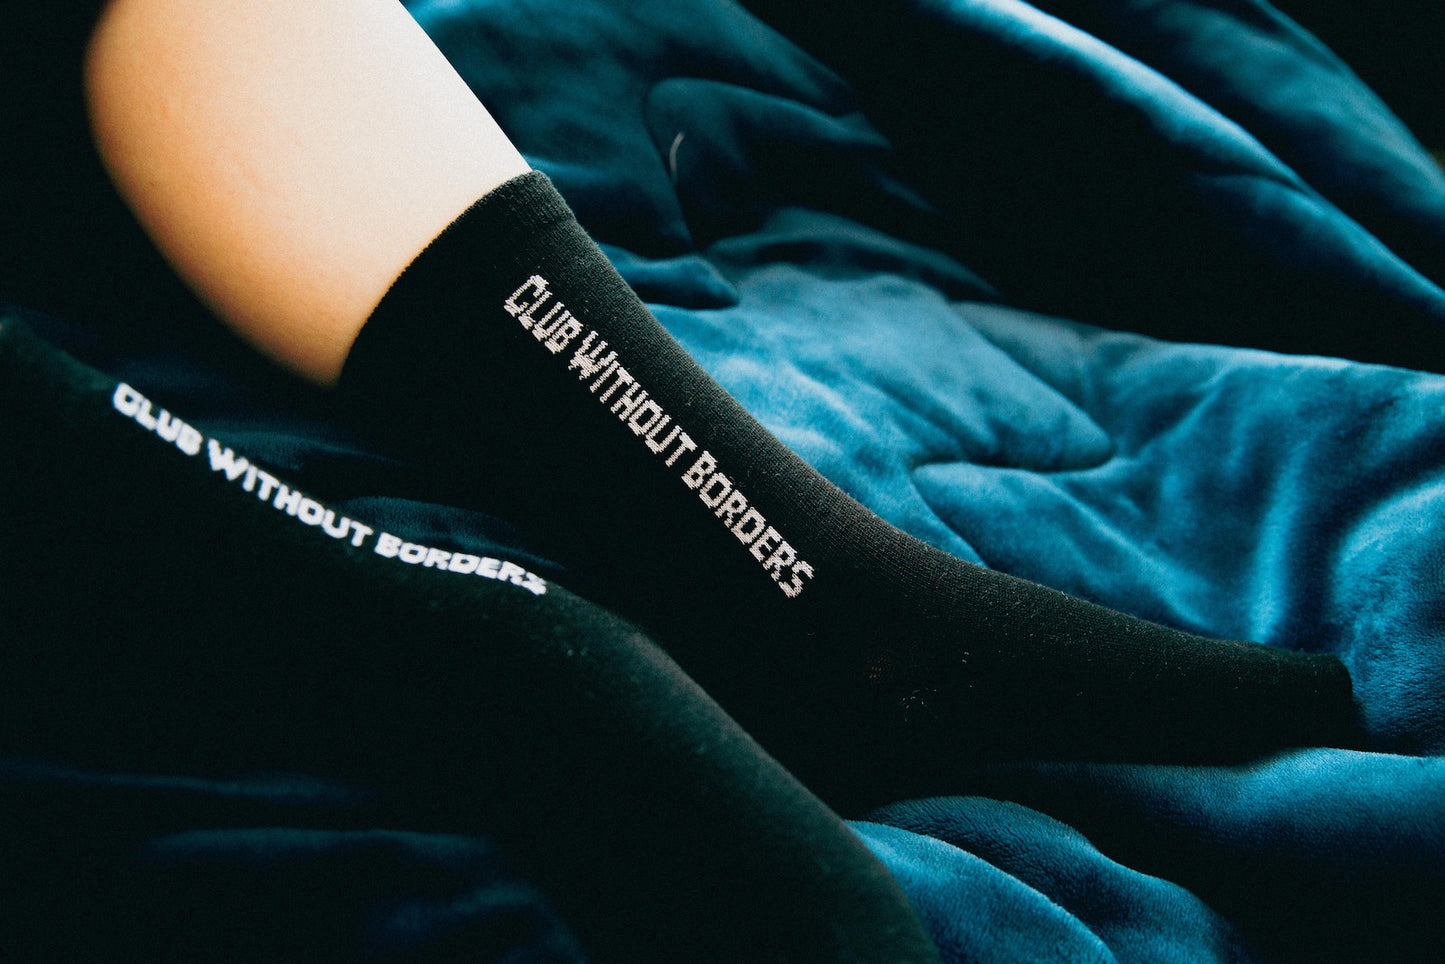 CLUB WITHOUT BORDERS Socks